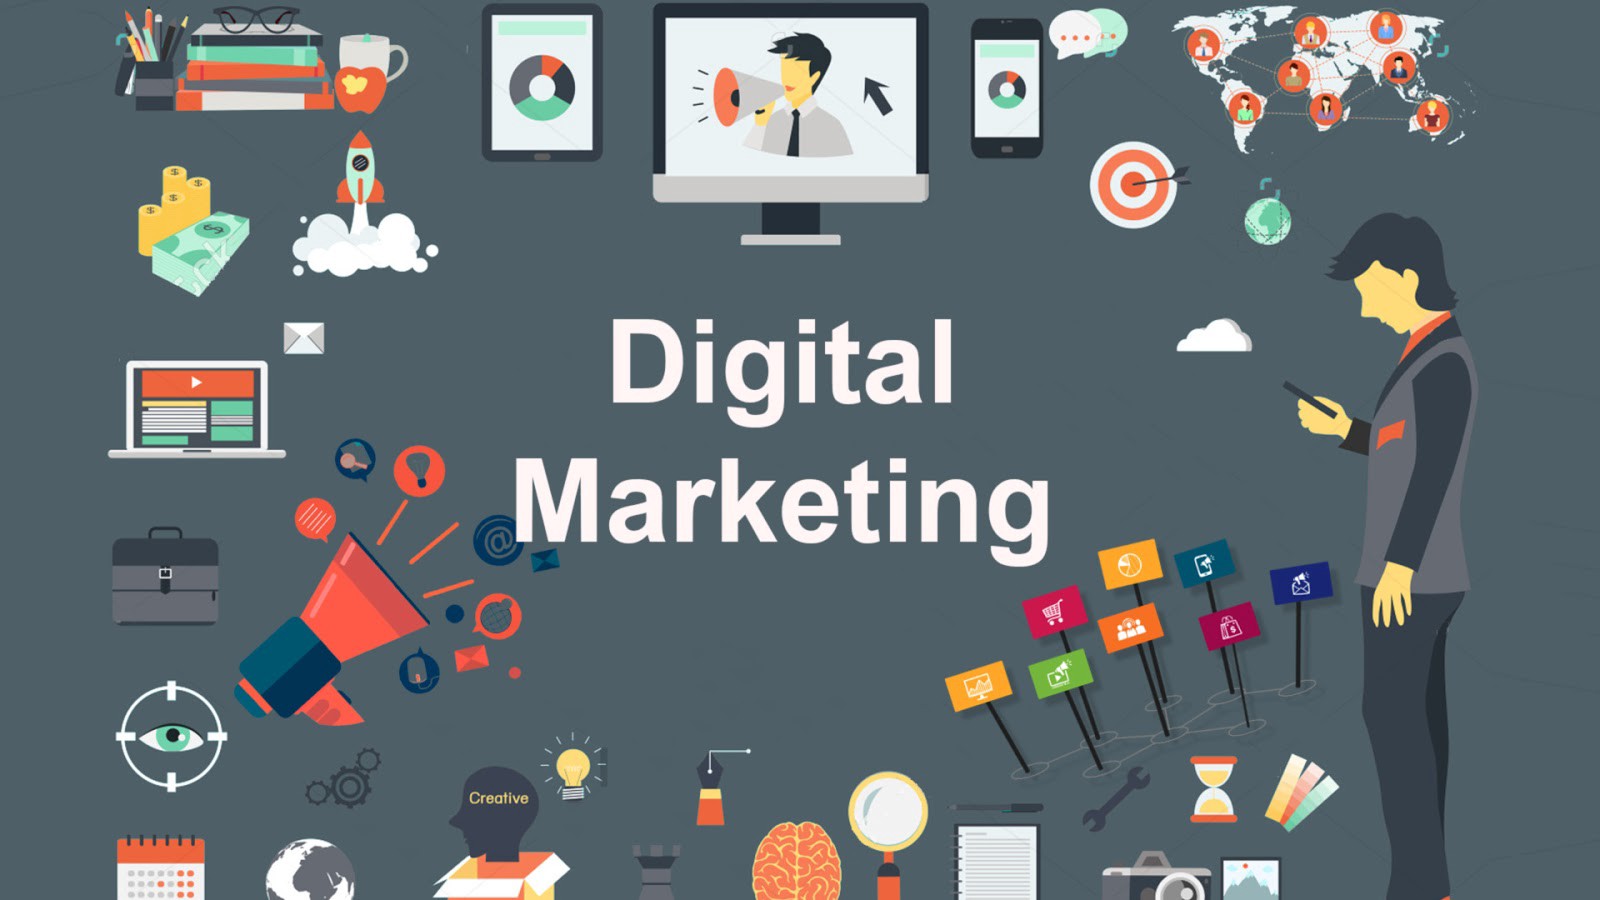 What Are The Advantages Of Digital Over Traditional Marketing?